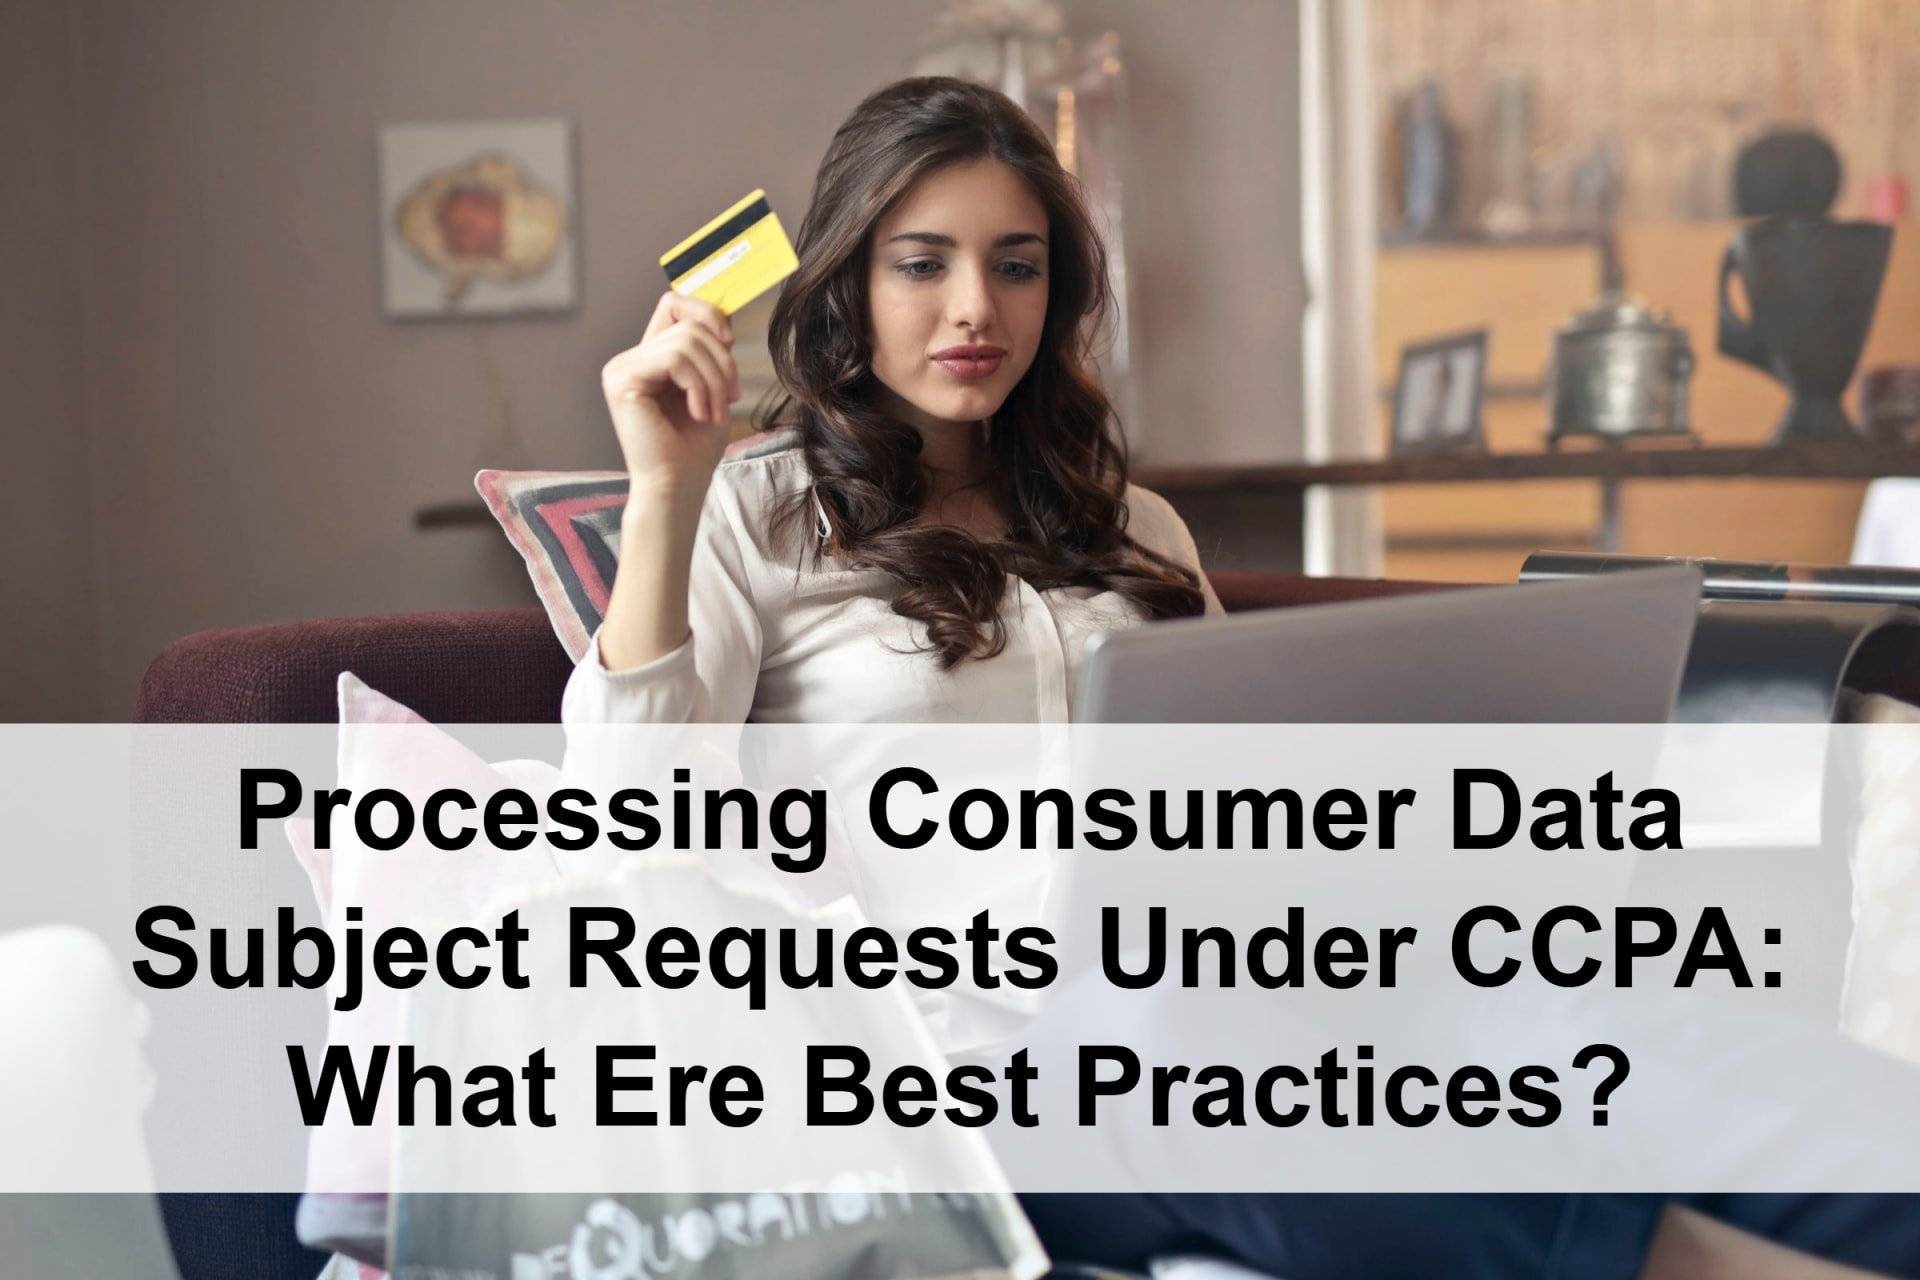 Processing consumer data subject requests under ccpa: what ere best practices?